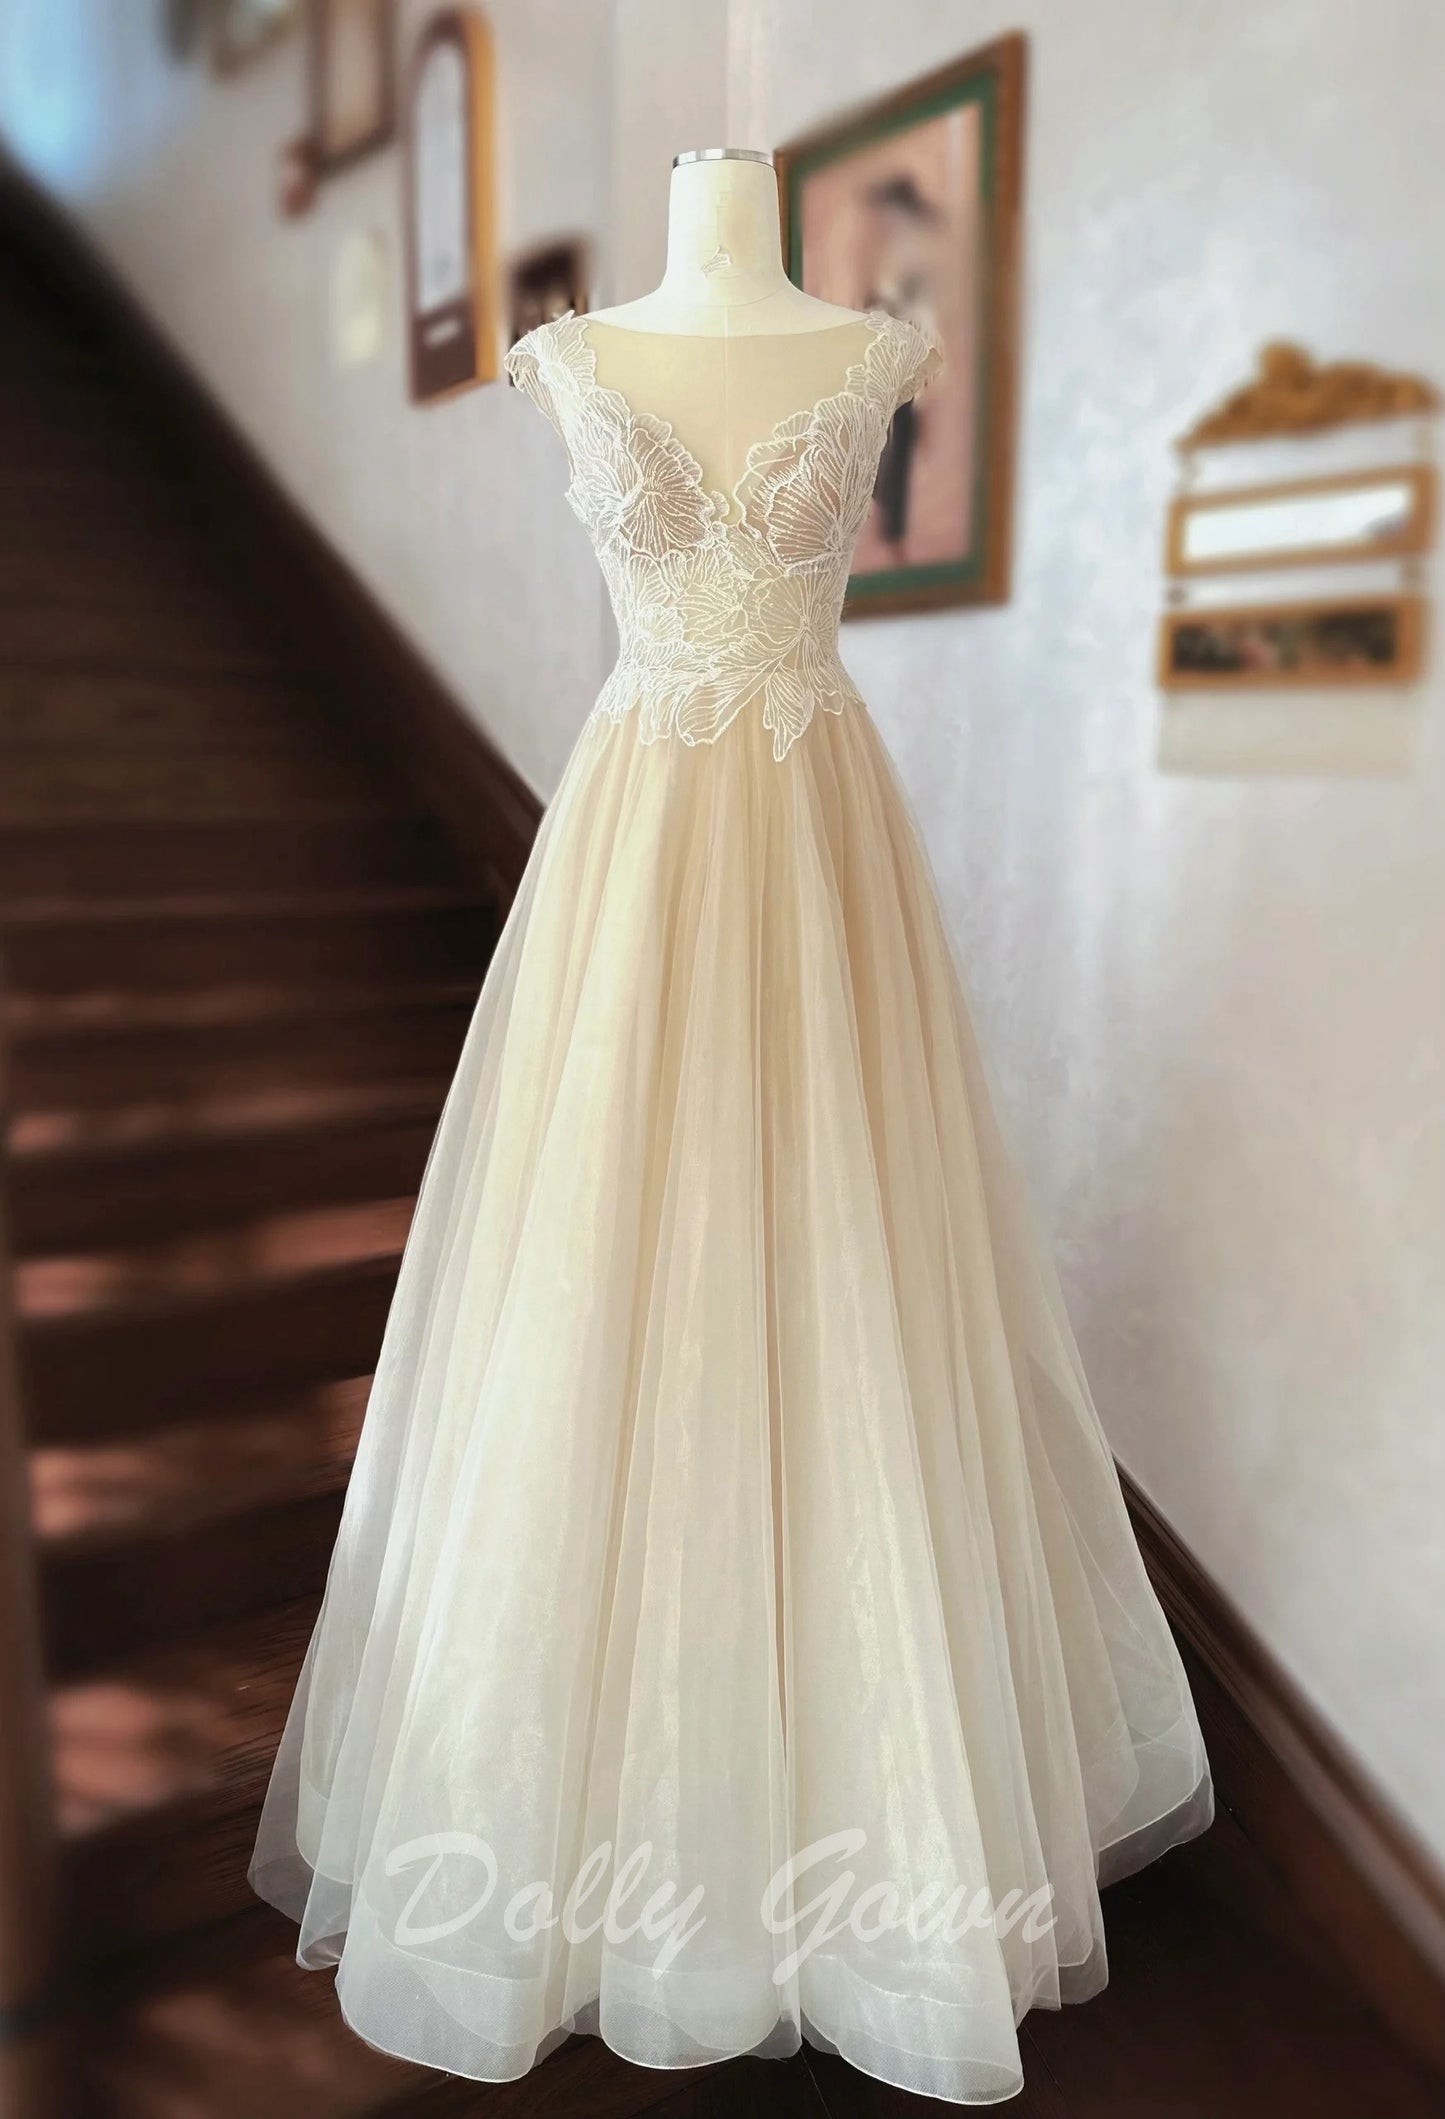 Fairy Illusion Lace Top A-line Sheer Flowy Champagne Wedding Dress - DollyGown